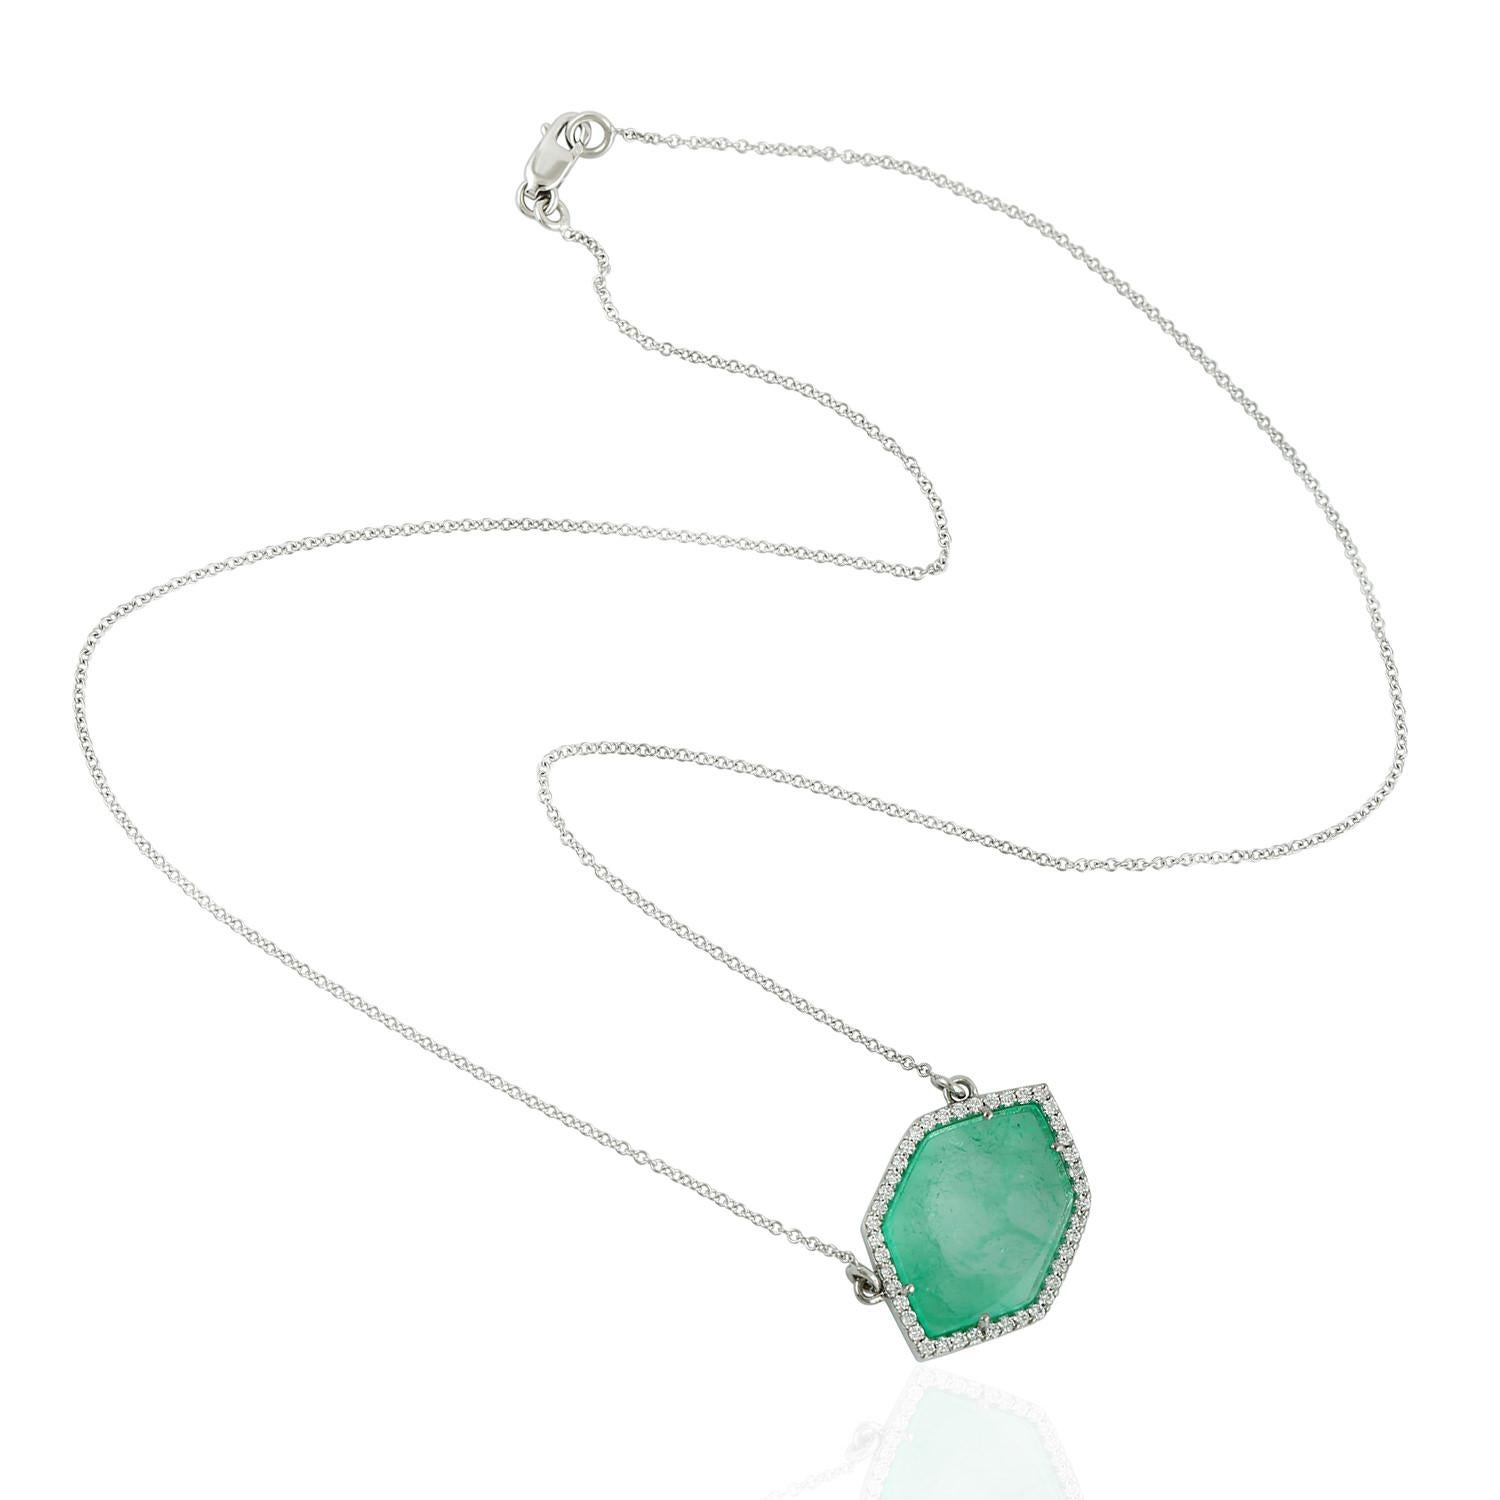 Mixed Cut Hexagon Shape Muzo Emerald & Pave Diamonds Necklace In 18k White Gold For Sale